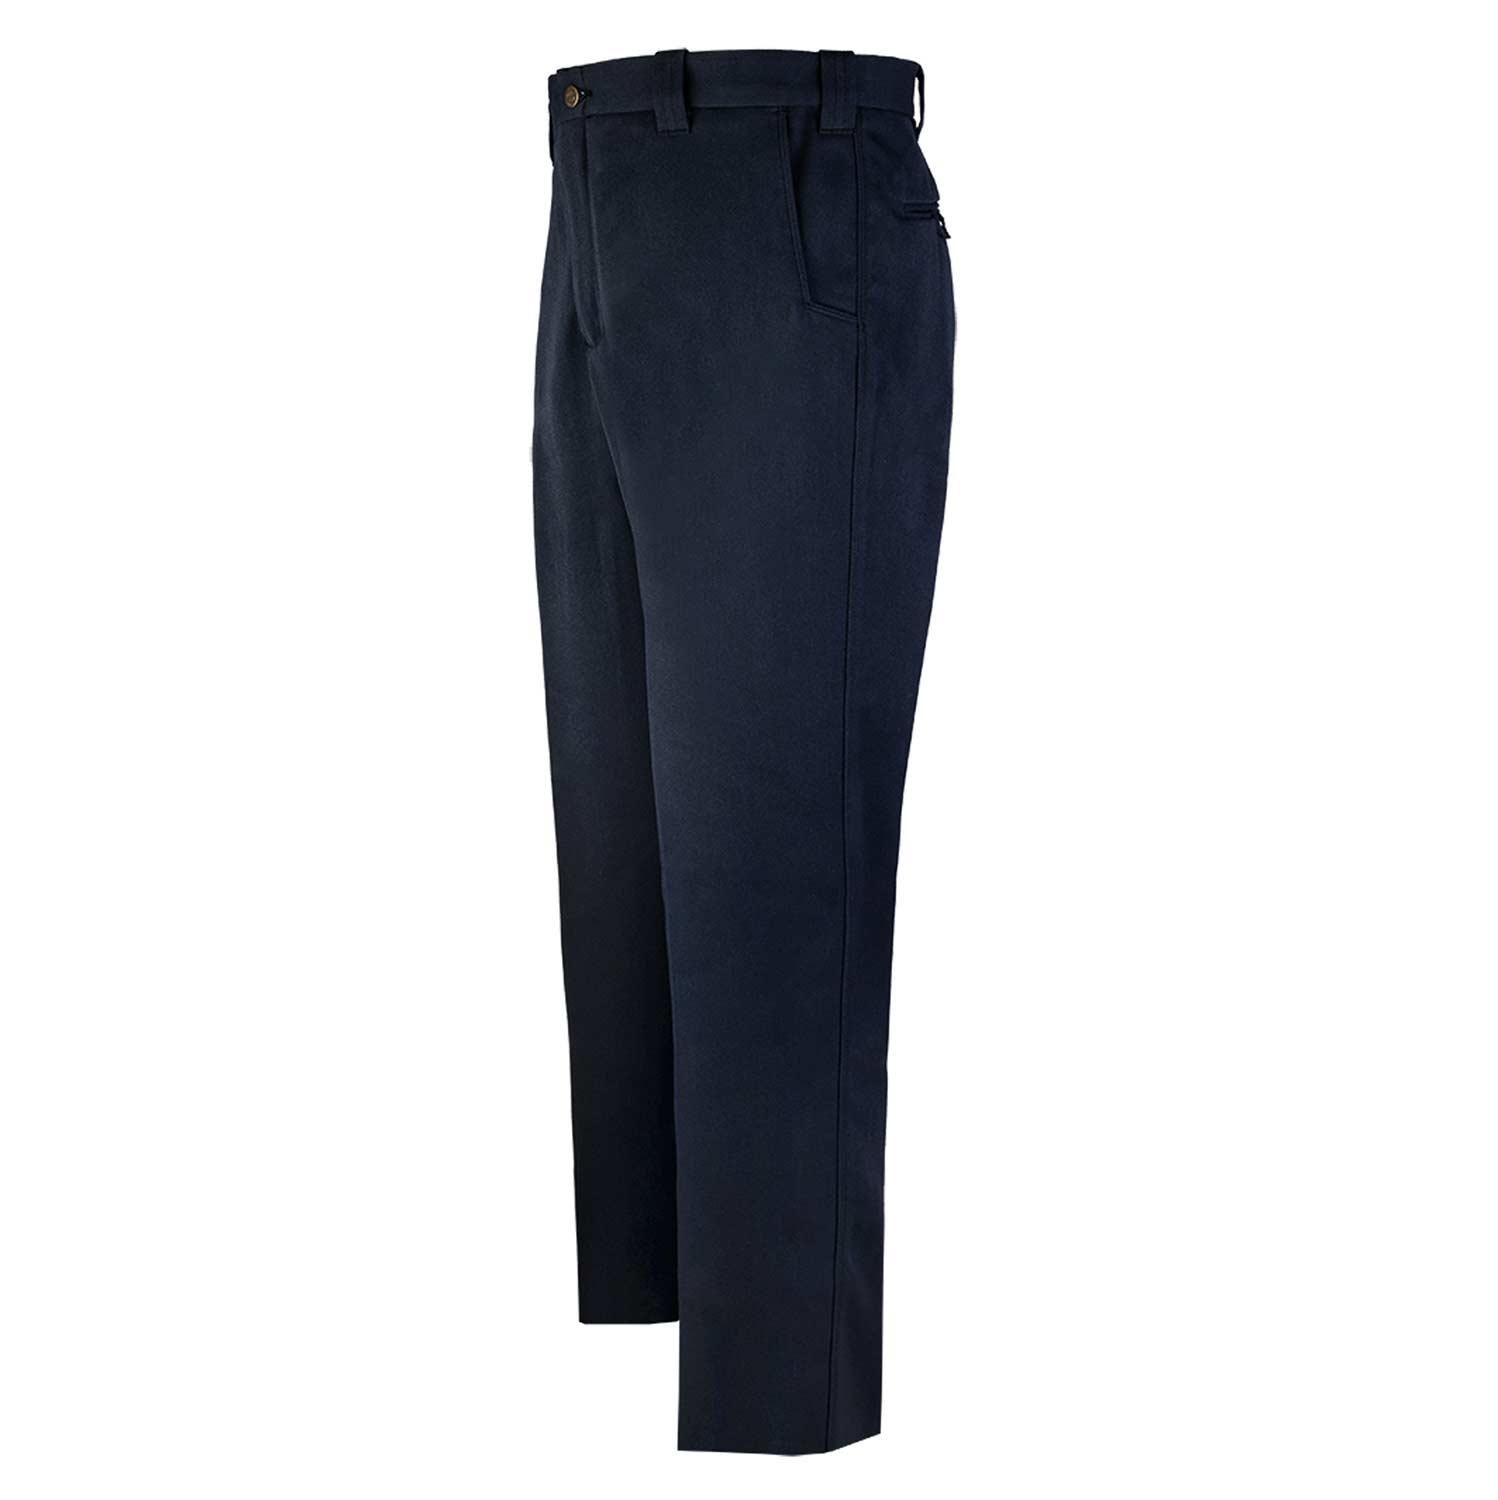 Cross FR Womens 4 Pocket Station Pant by Flying Cross